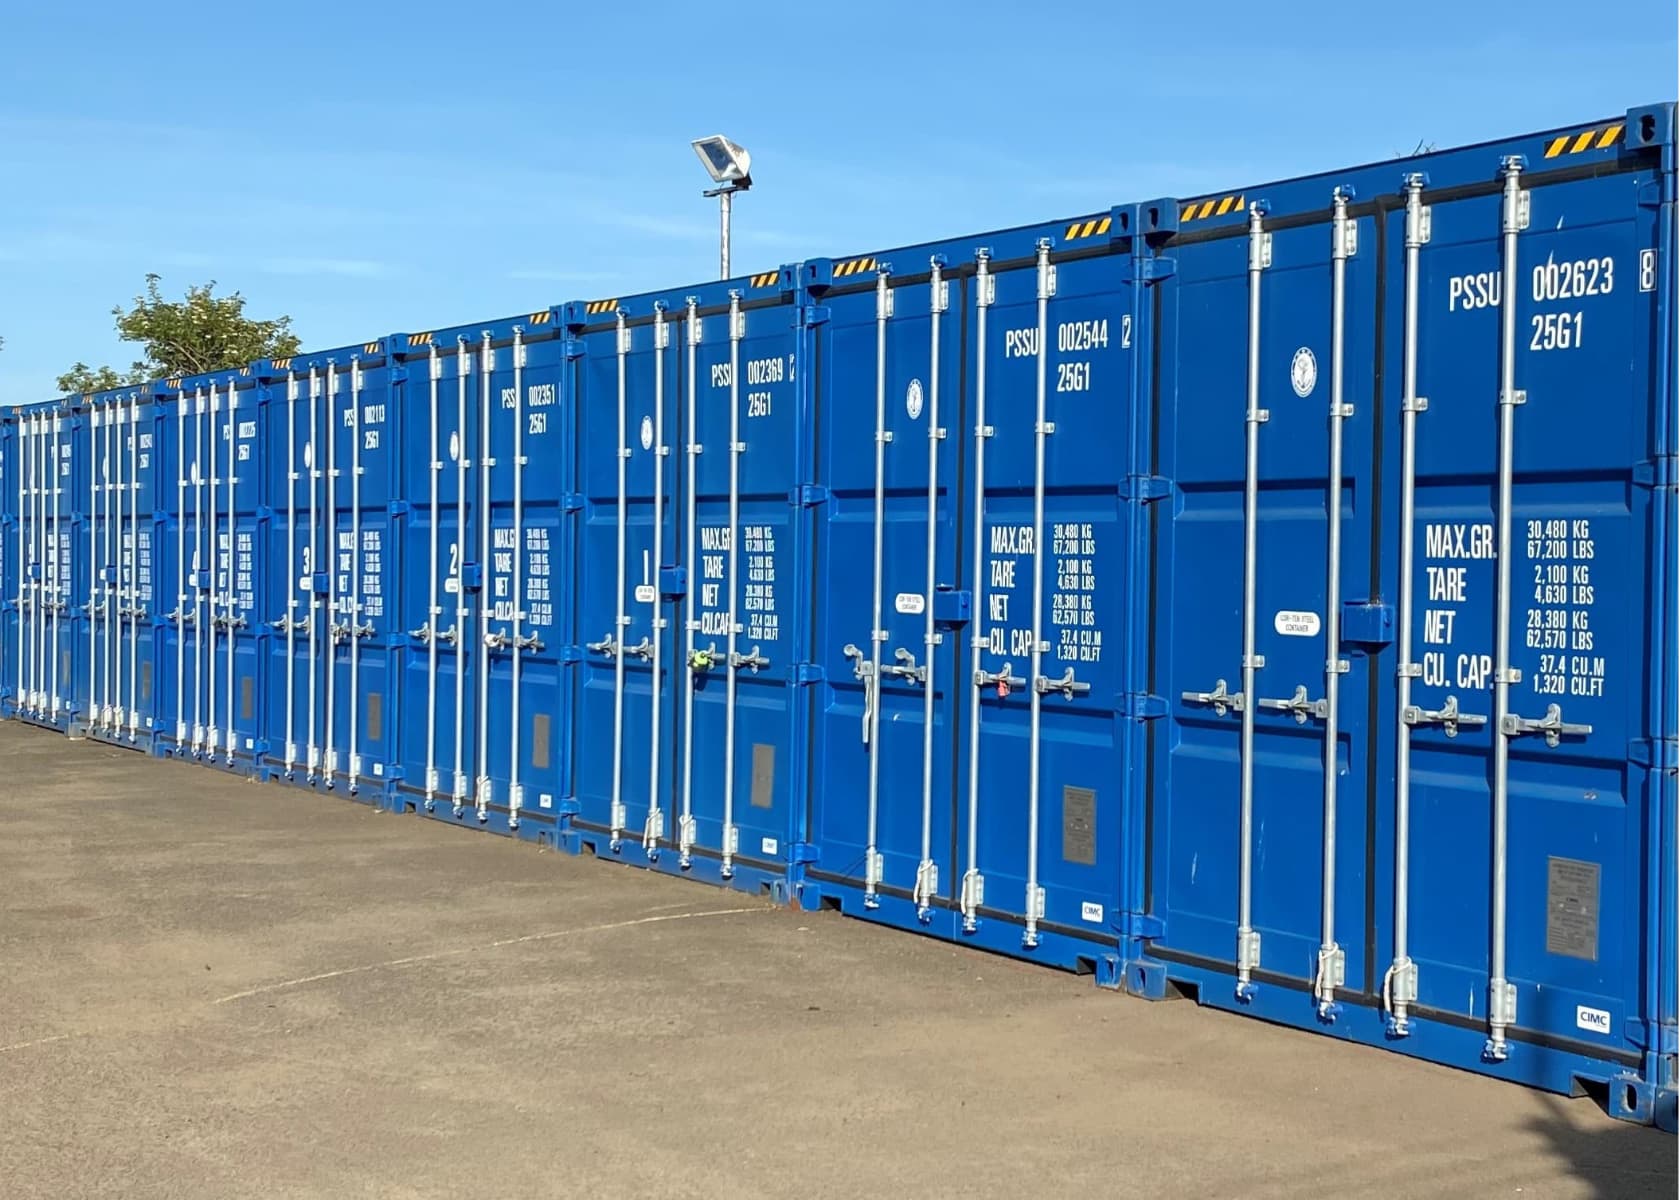 Shipping Containers for Self Storage Companies - Portable Space